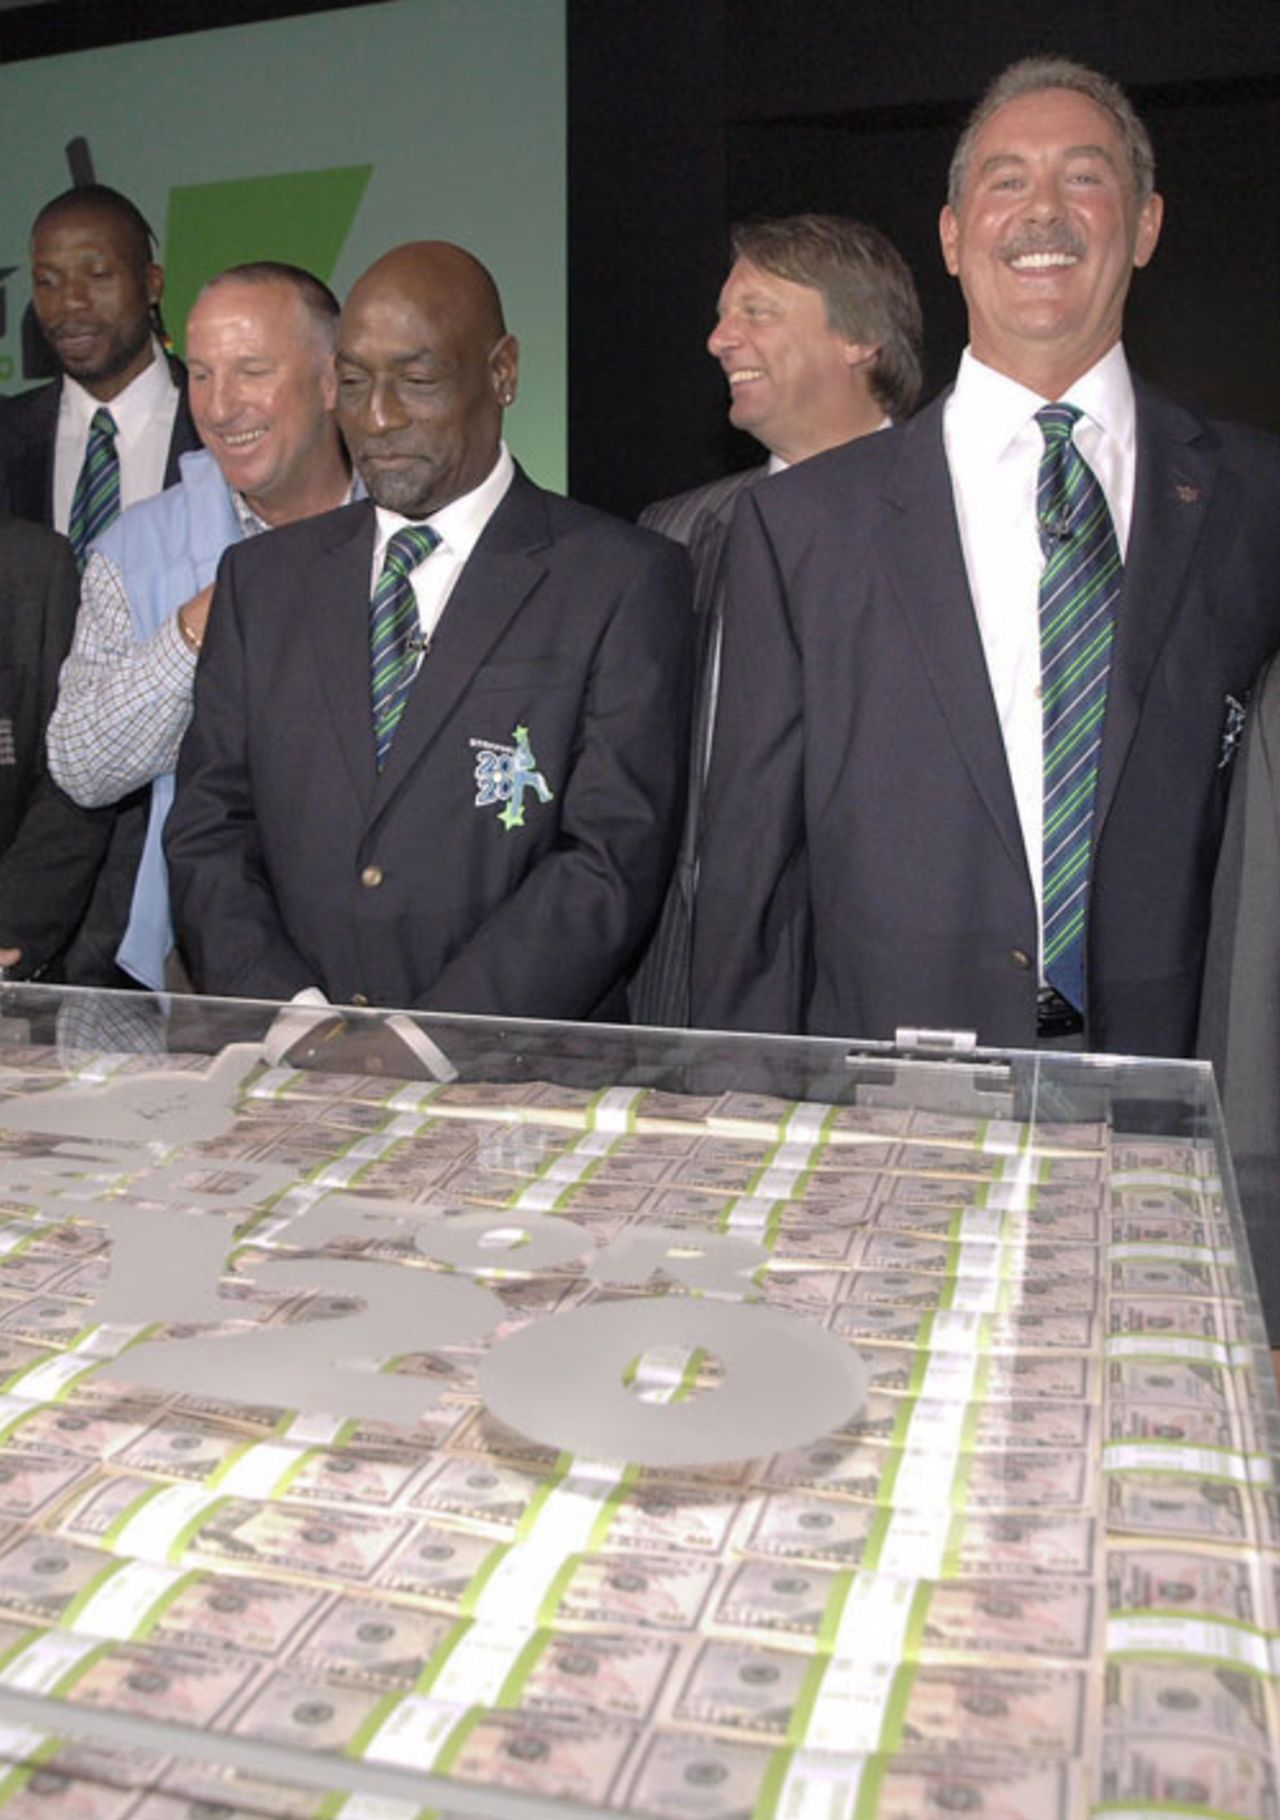 Allen Stanford poses with Sir Viv Richards and Sir Ian Botham in front of the US$20 million, Lord's, June 11, 2008